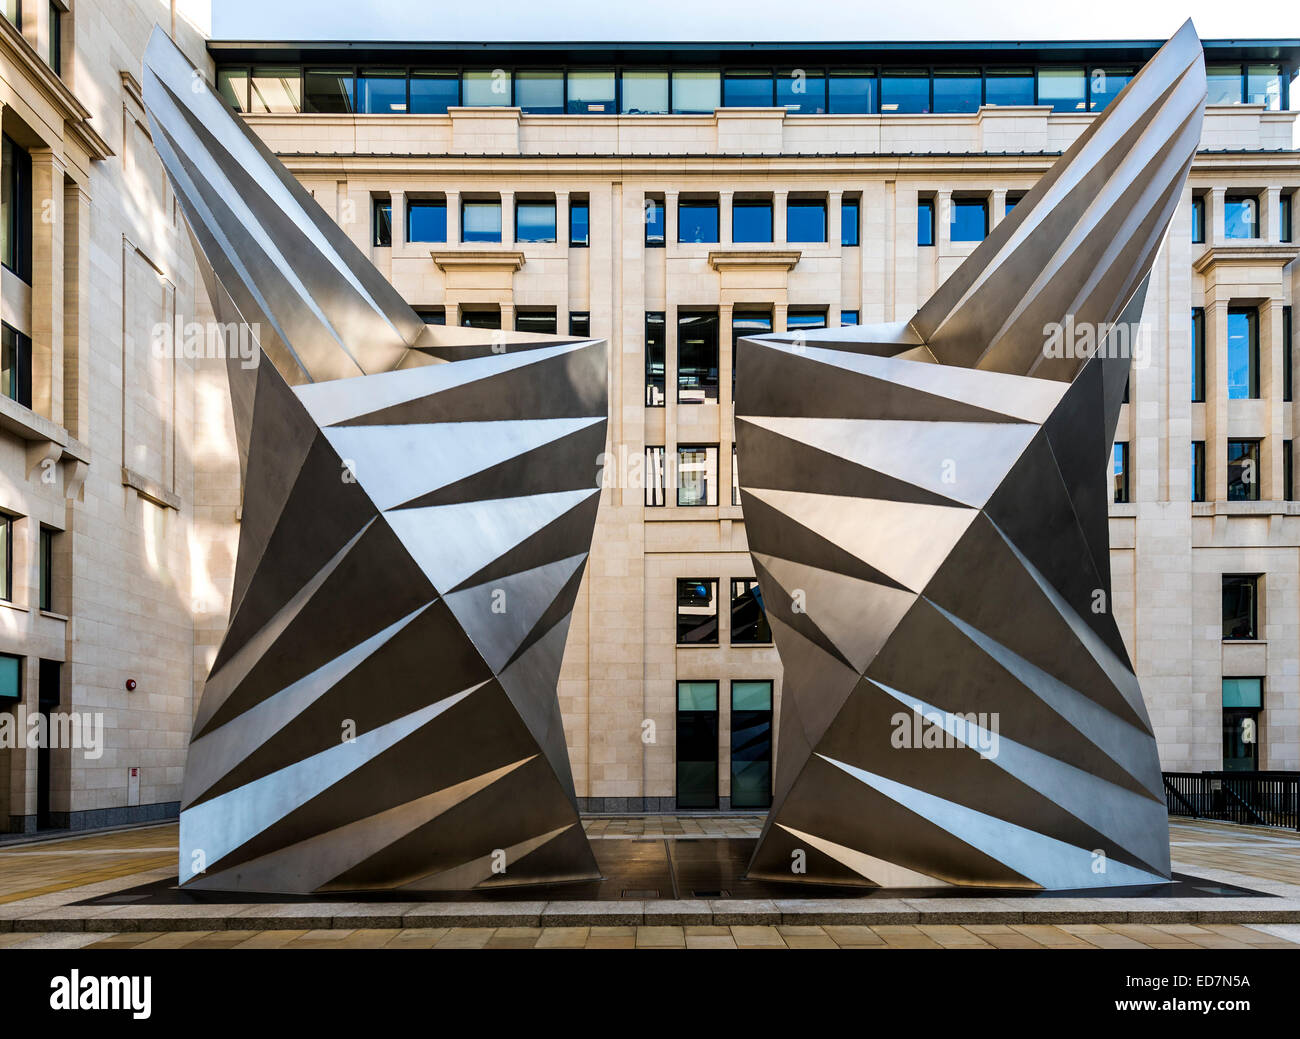 Modern artwork sculpture on Ave Maria Lane in the City of London Stock Photo